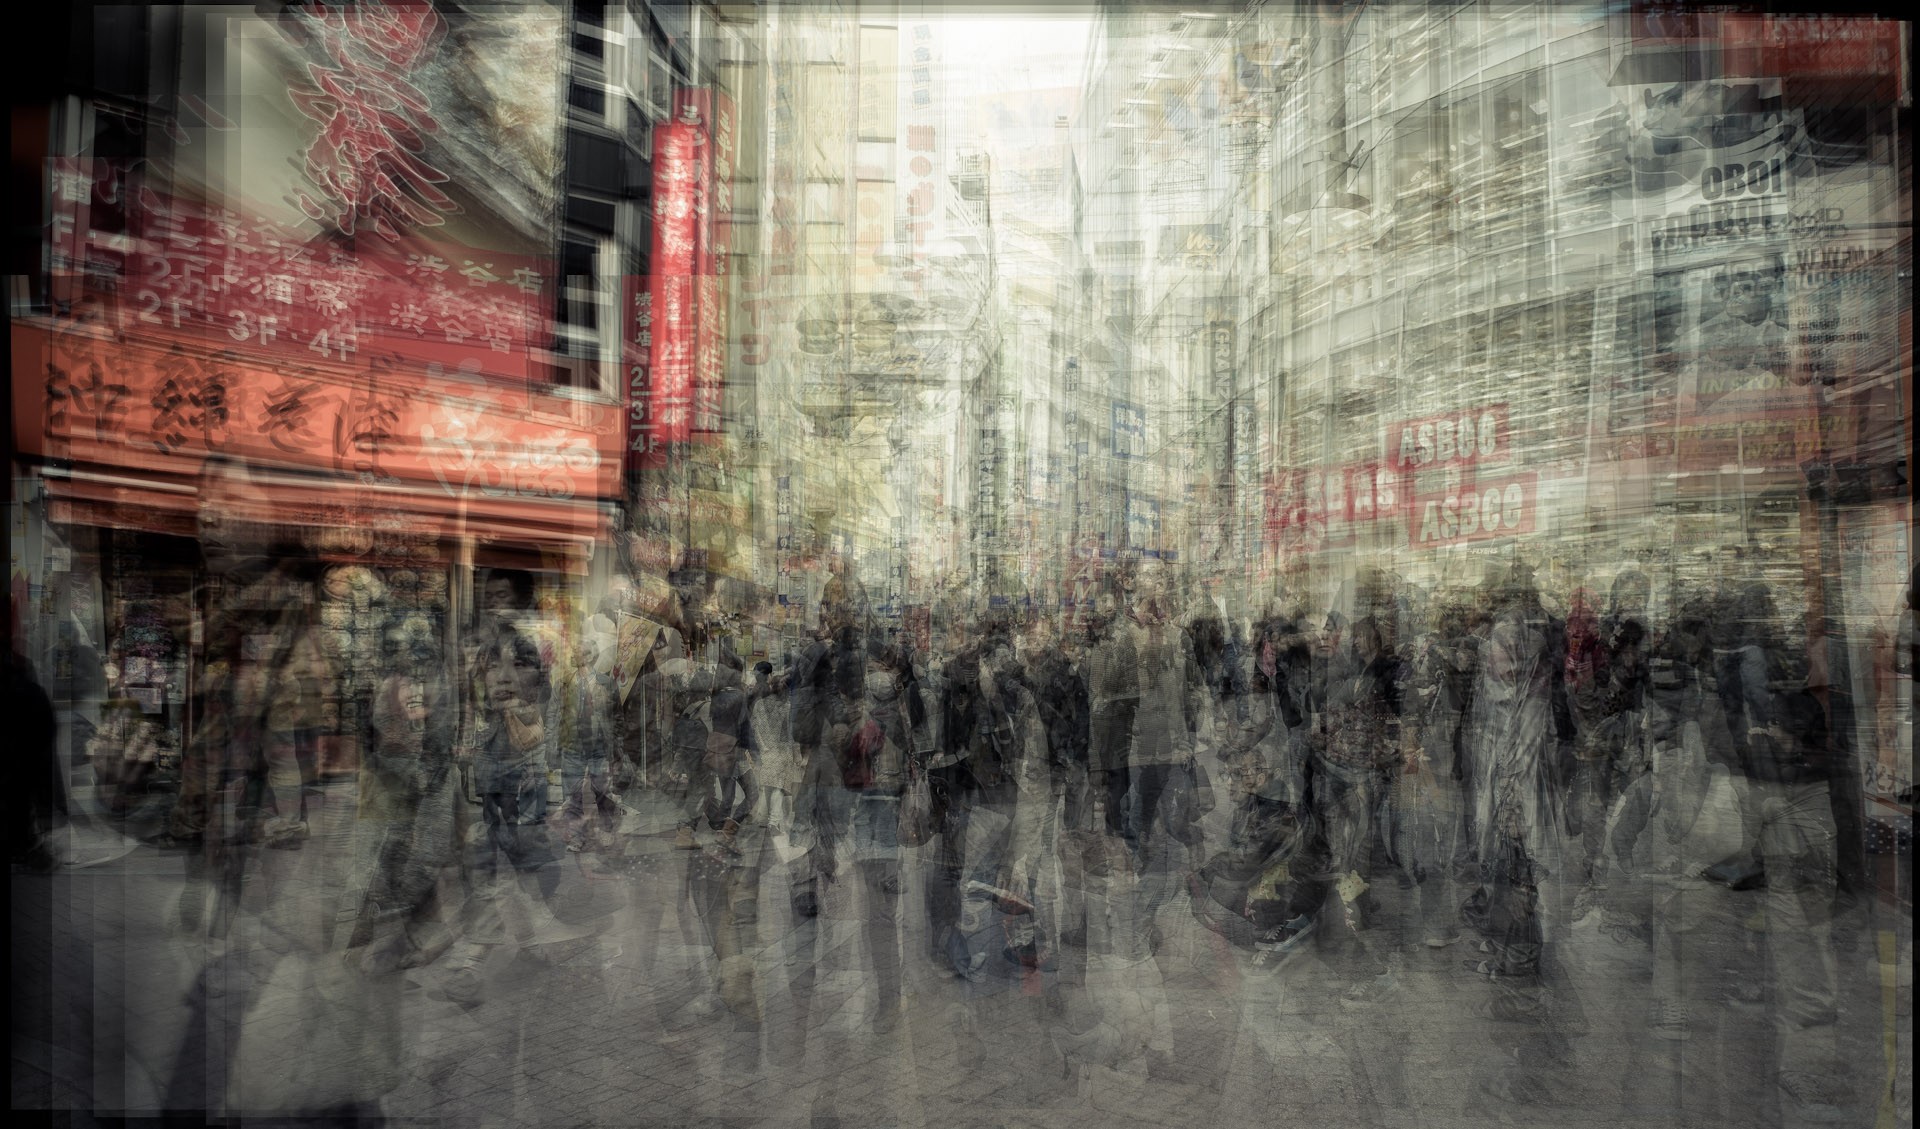 General 1920x1129 architecture building city Tokyo Japan capital street people crowds motion blur artwork photography long exposure